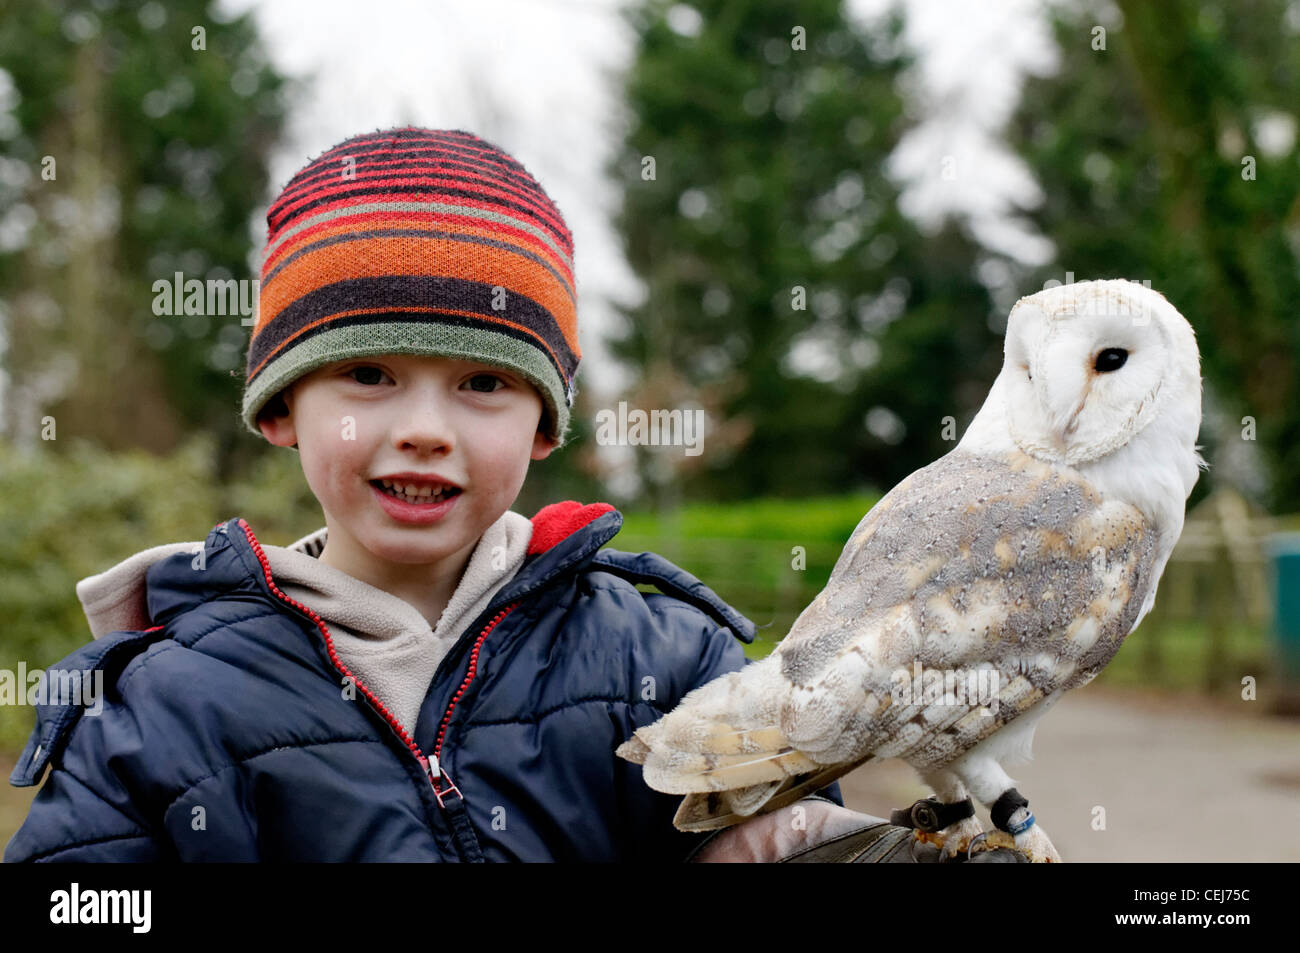 A young boy holding a Barn Owl on his wrist Stock Photo